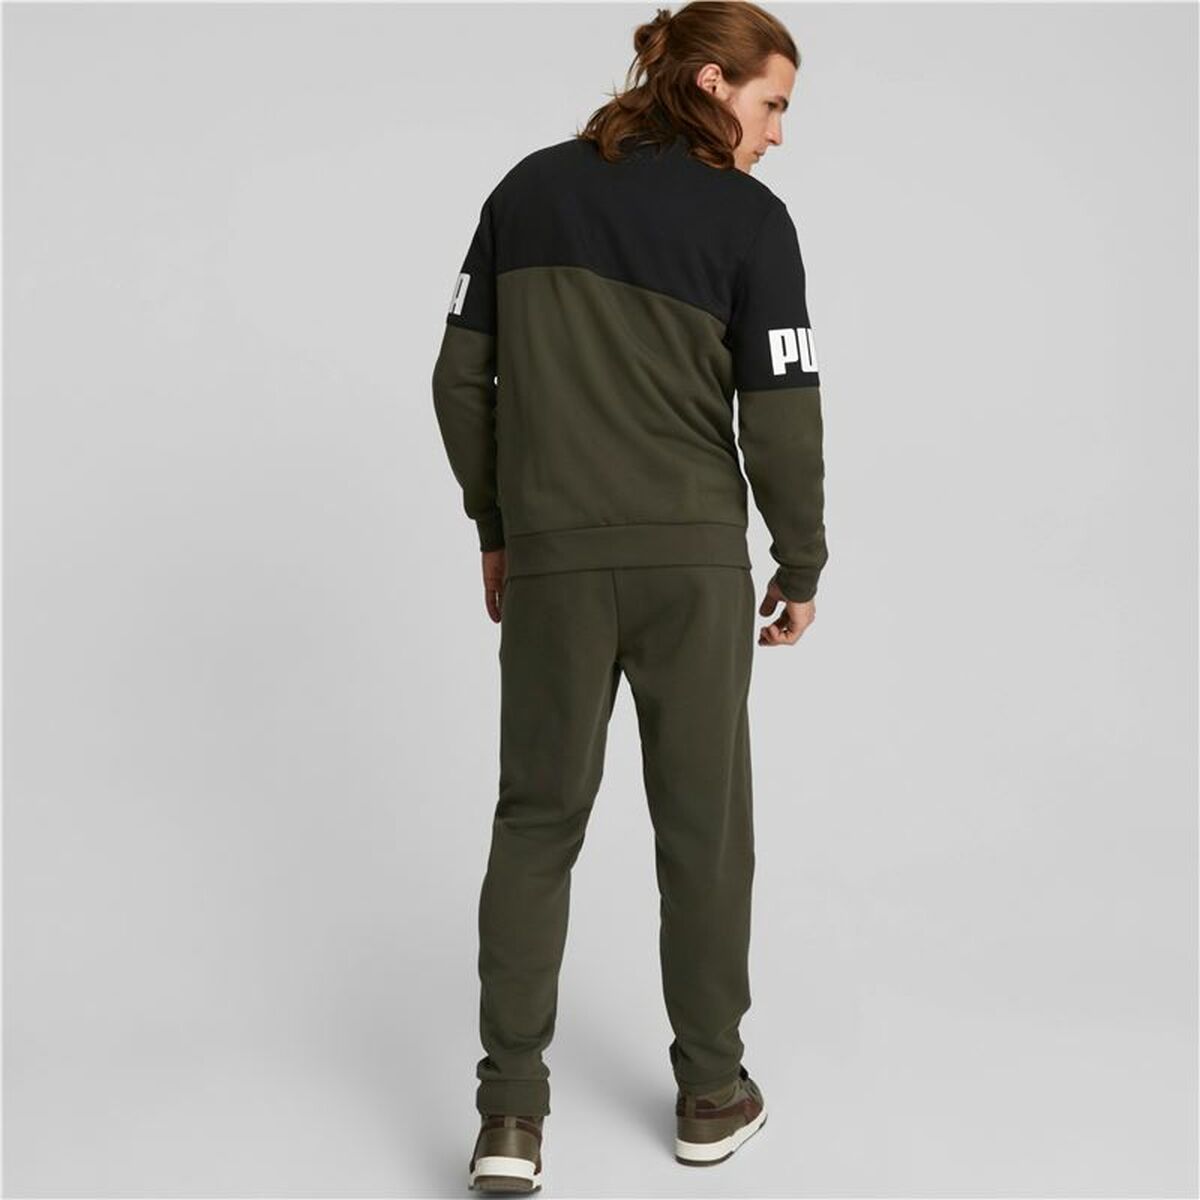 Tracksuit for Adults Puma Power Colorblock Olive Men